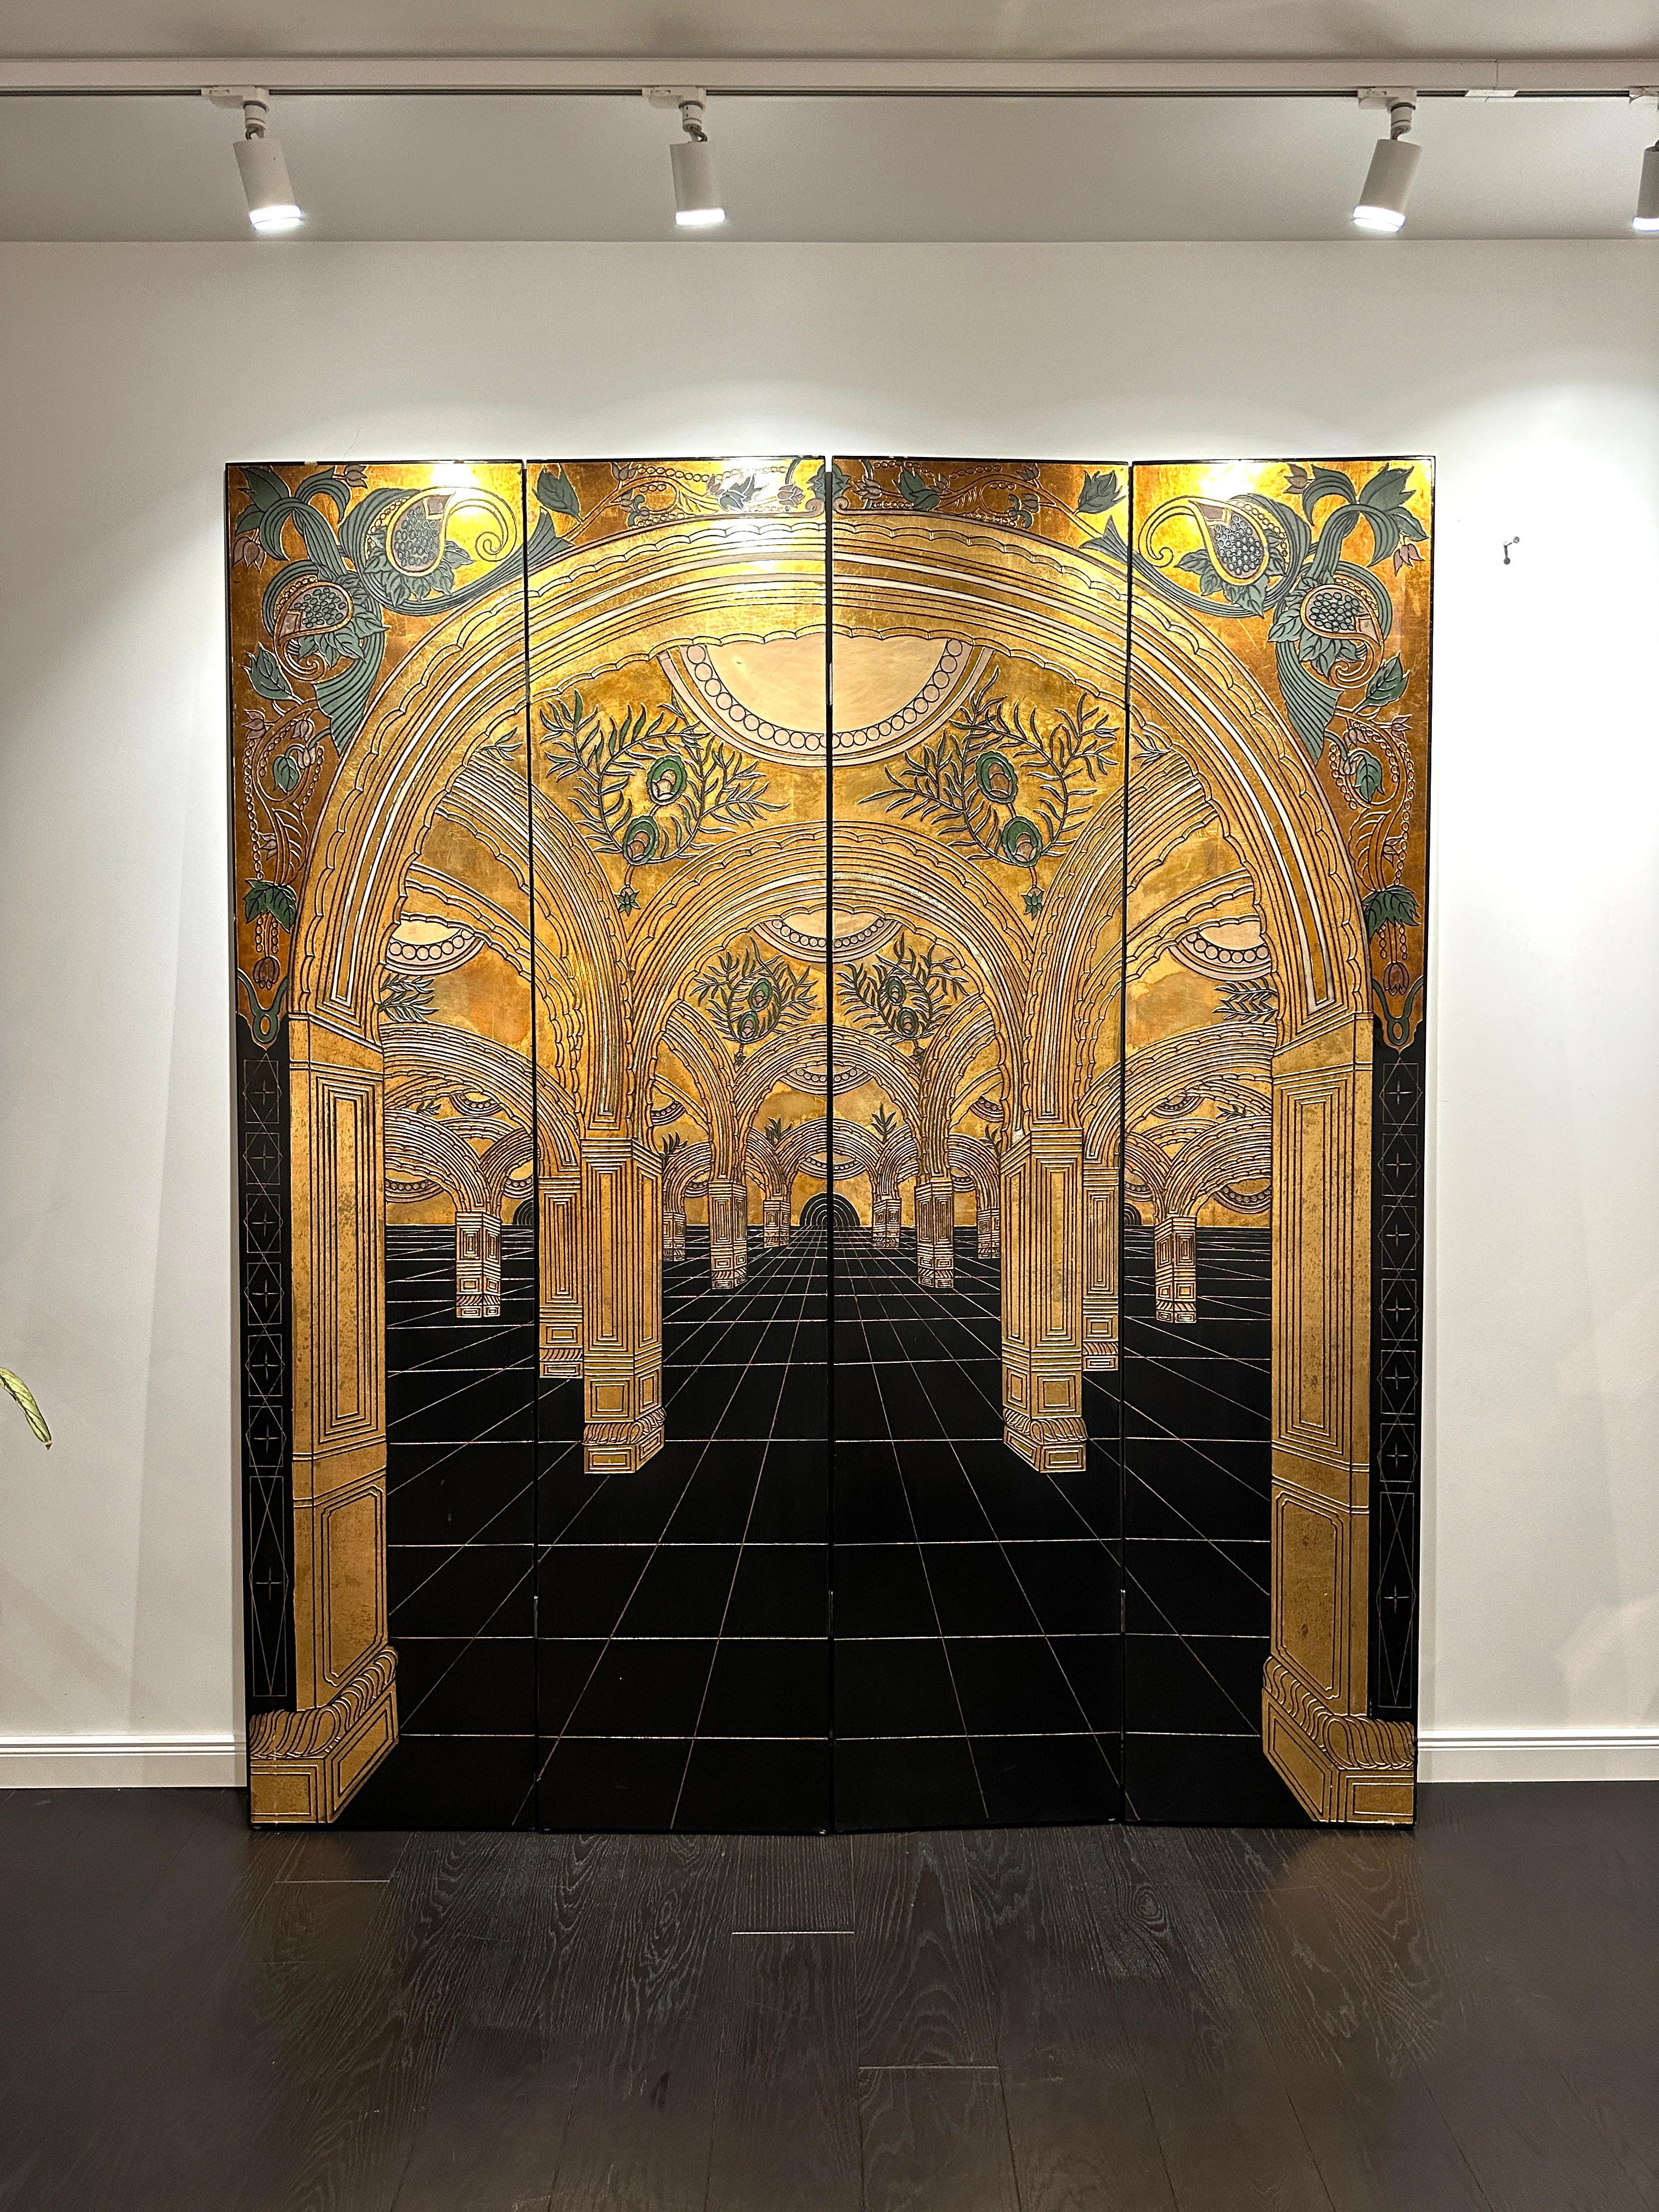 Beautiful and rare Art Nouveau or Art Deco 20th century Paravent. The stunning geometry of the pattern draws you into a hall full of archways and pillars.
The room divider has four panels and is made out of wood, painted and gold leafed. The pattern